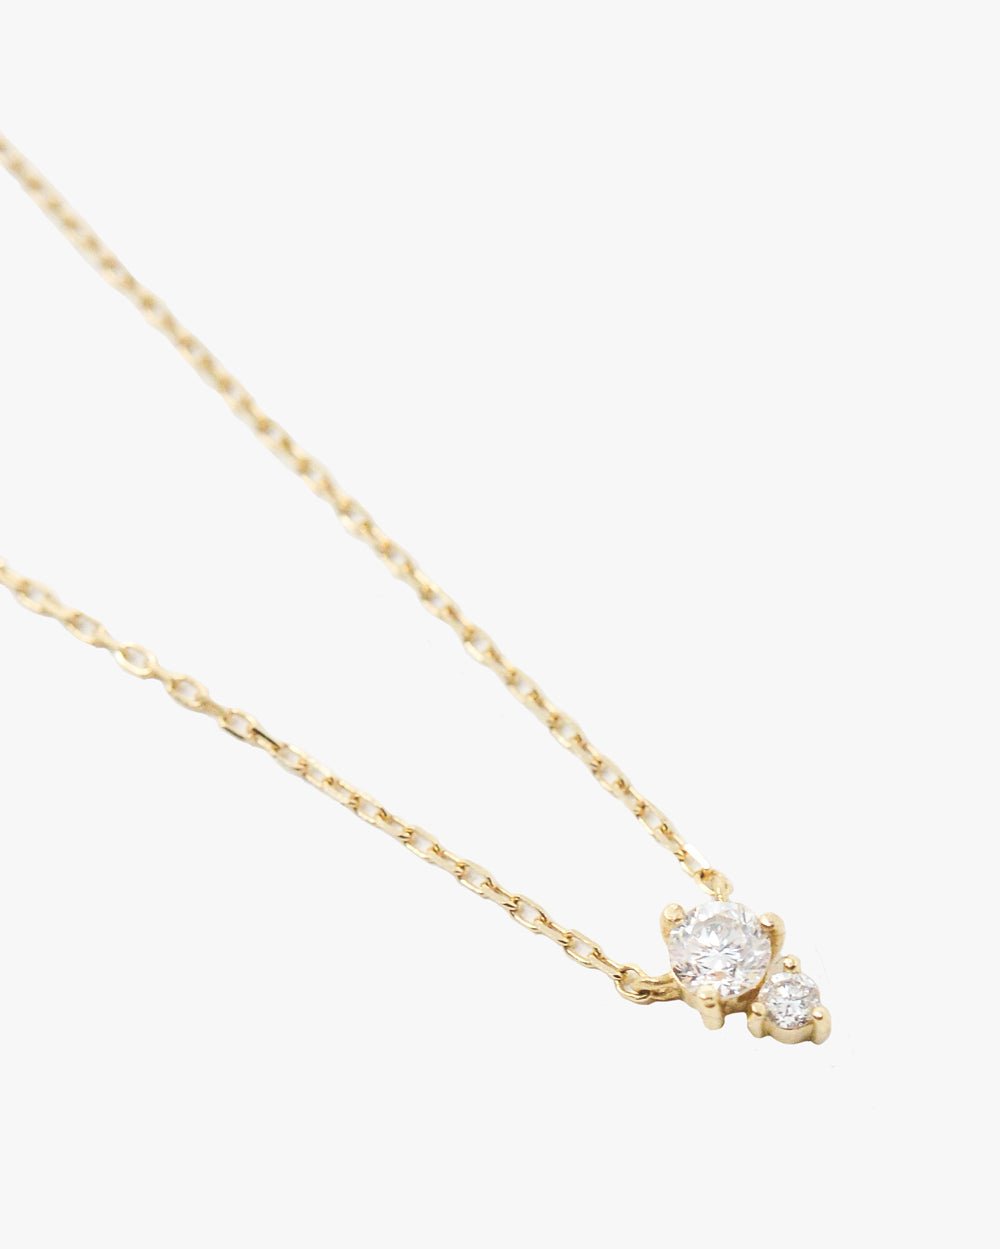 BRENTWOOD DIAMOND DUO NECKLACE - Shop Cupcakes and Cashmere